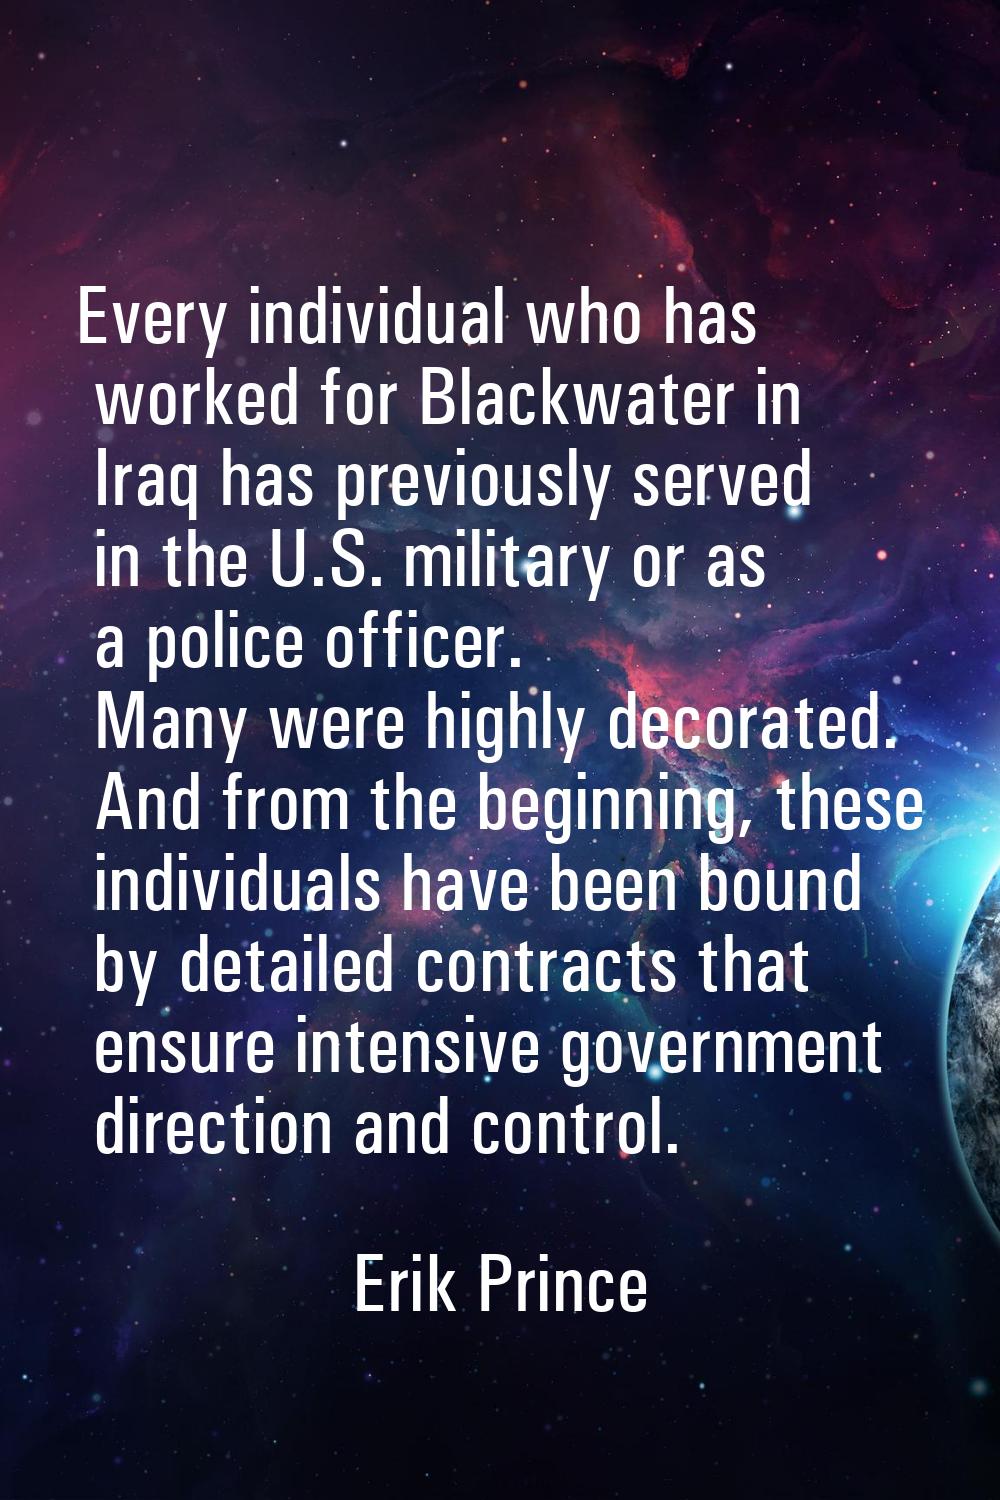 Every individual who has worked for Blackwater in Iraq has previously served in the U.S. military o